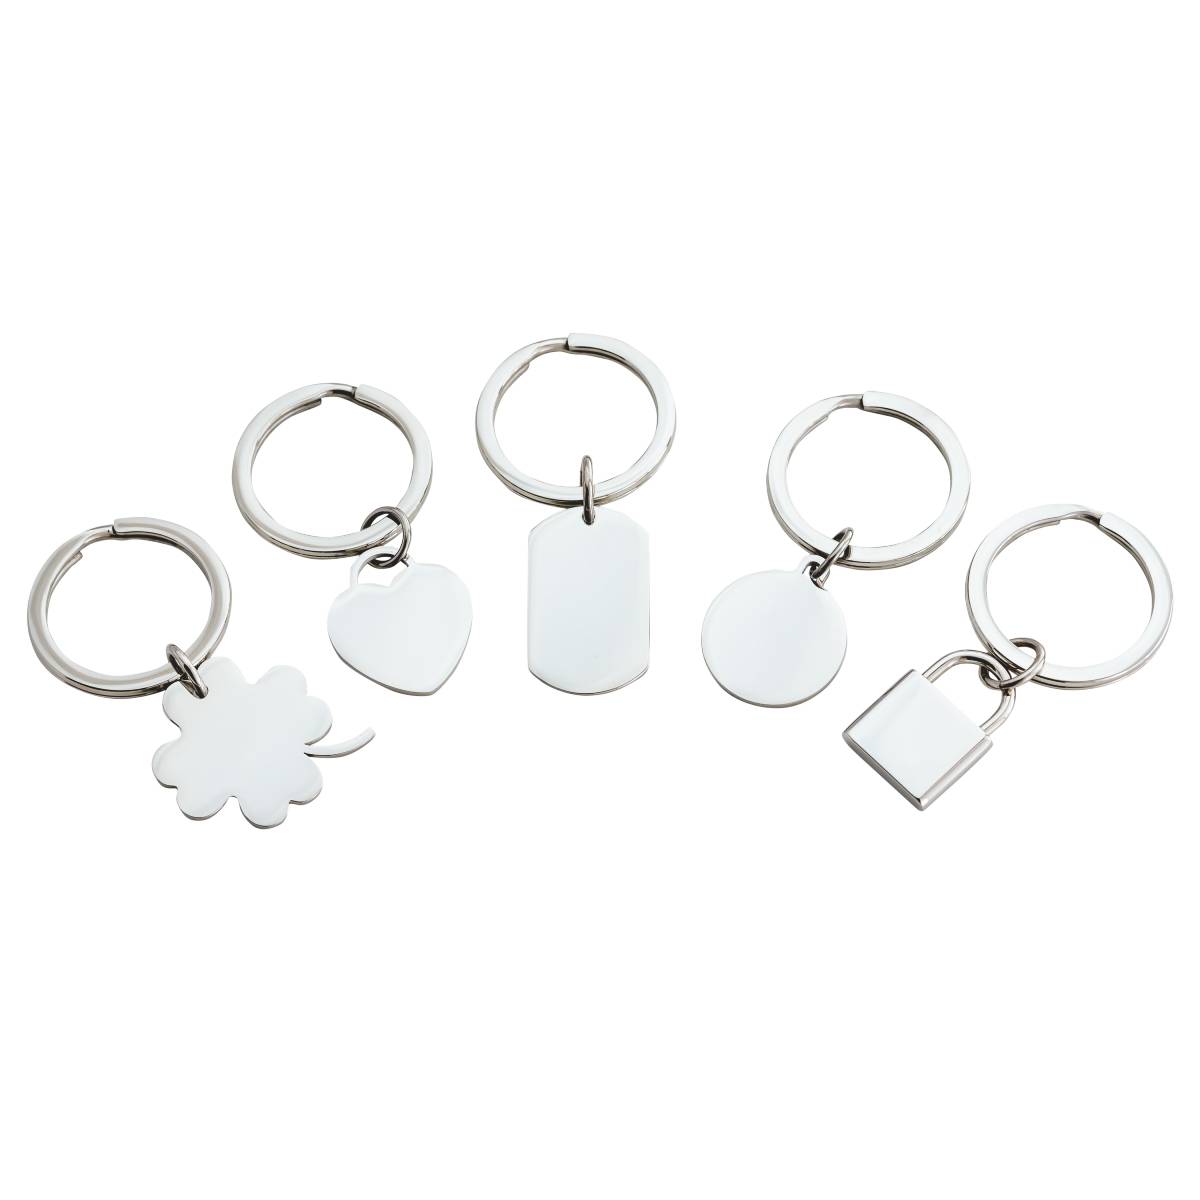 5 styles of keyrings you can engrave